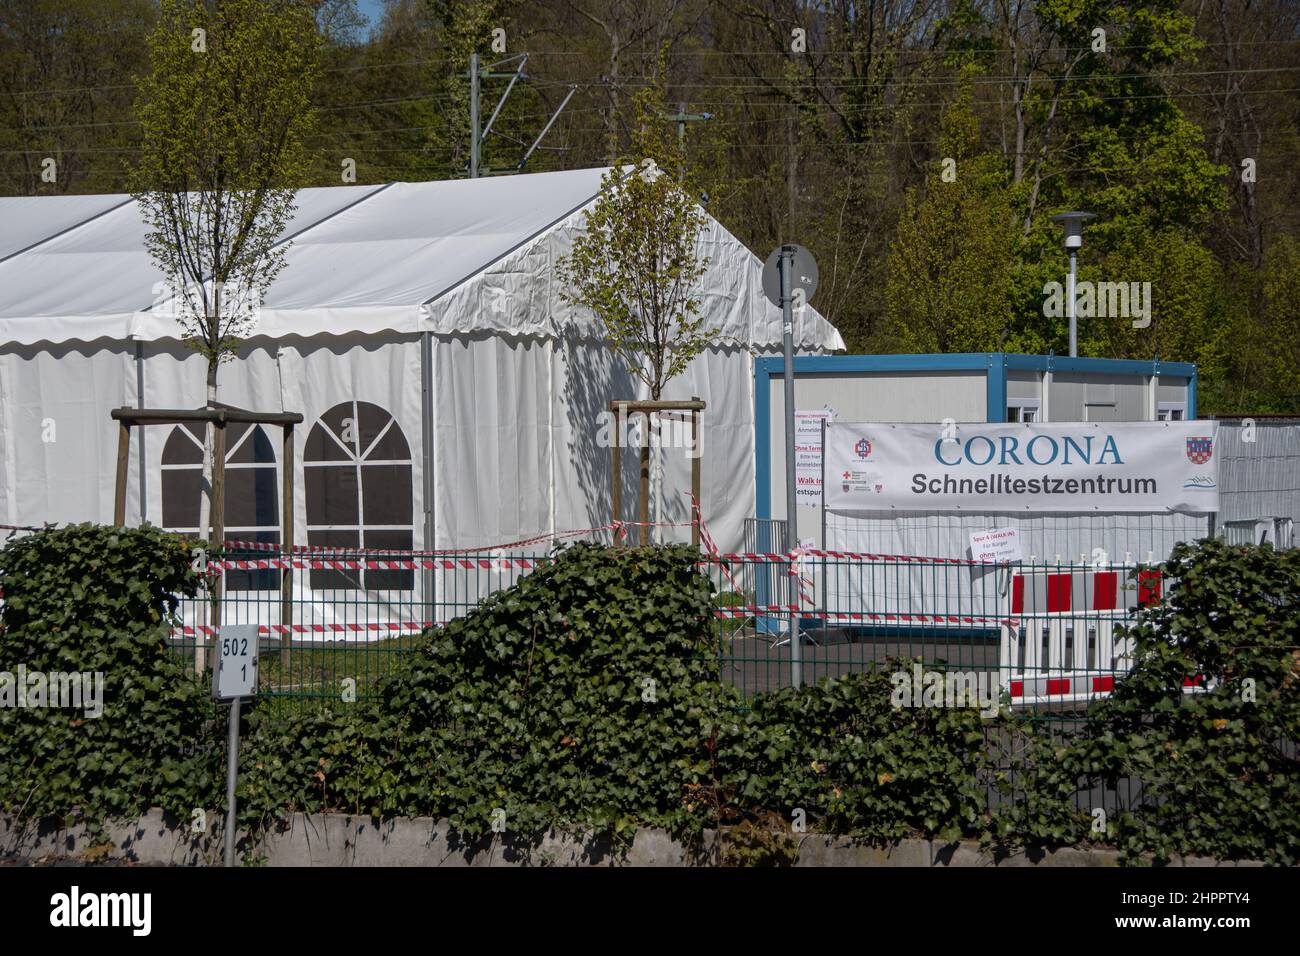 Bad Honnef, Germany  25 April 2021,  A Corona rapid test center in Bad Honnef Stock Photo